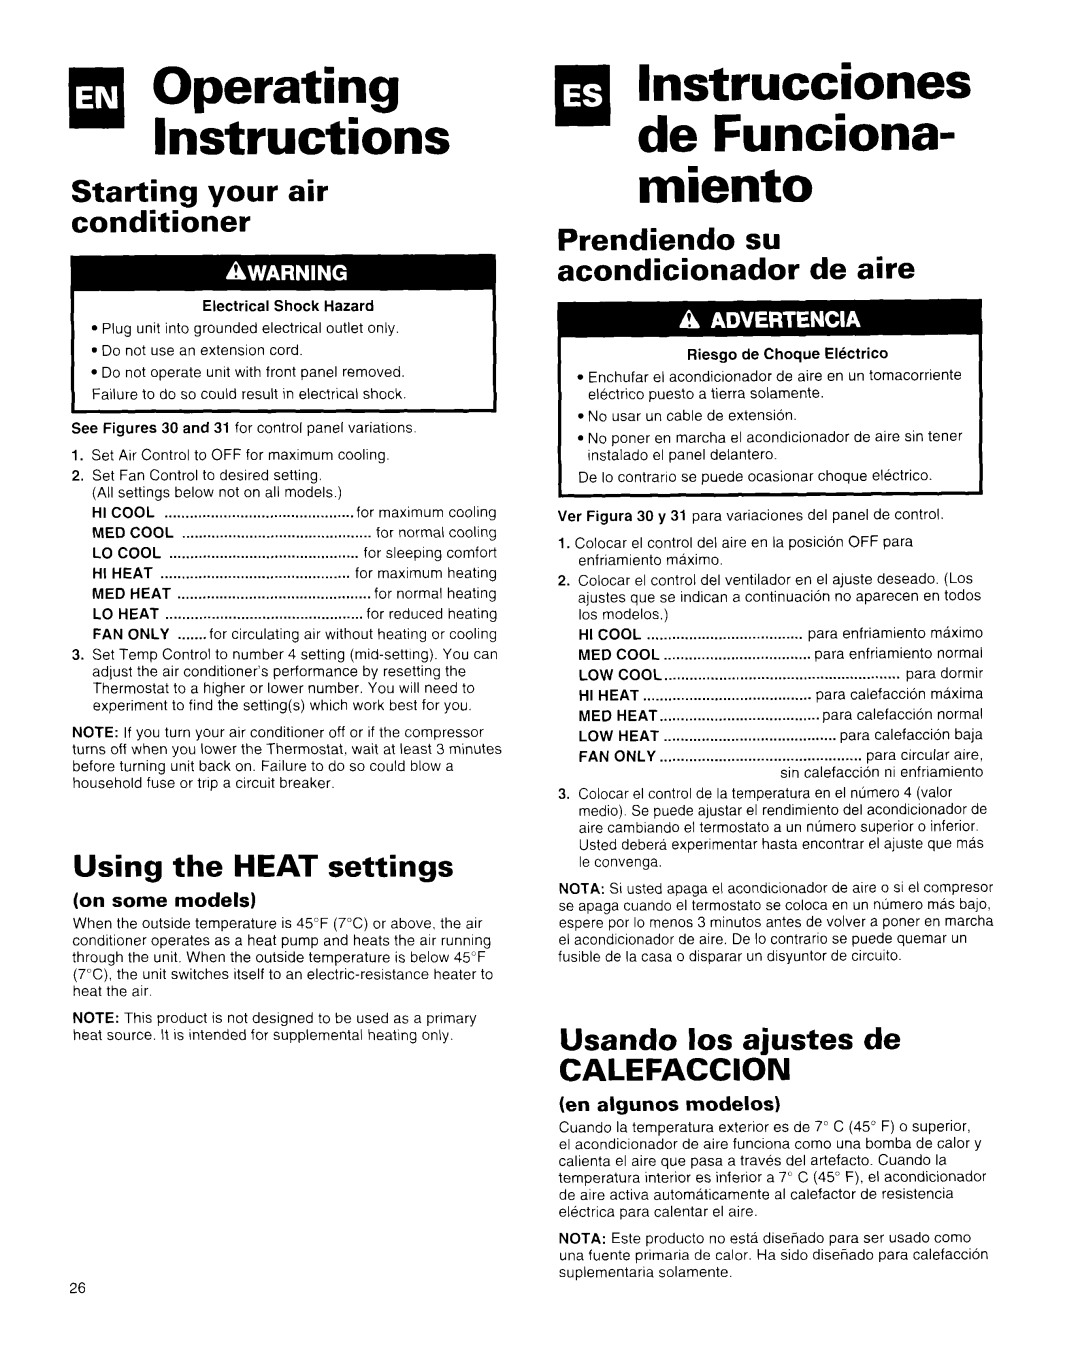 Whirlpool X18004D00 manual mlnstrucciones de Funciona- miento, Starting your air conditioner, Using the HEAT settings 